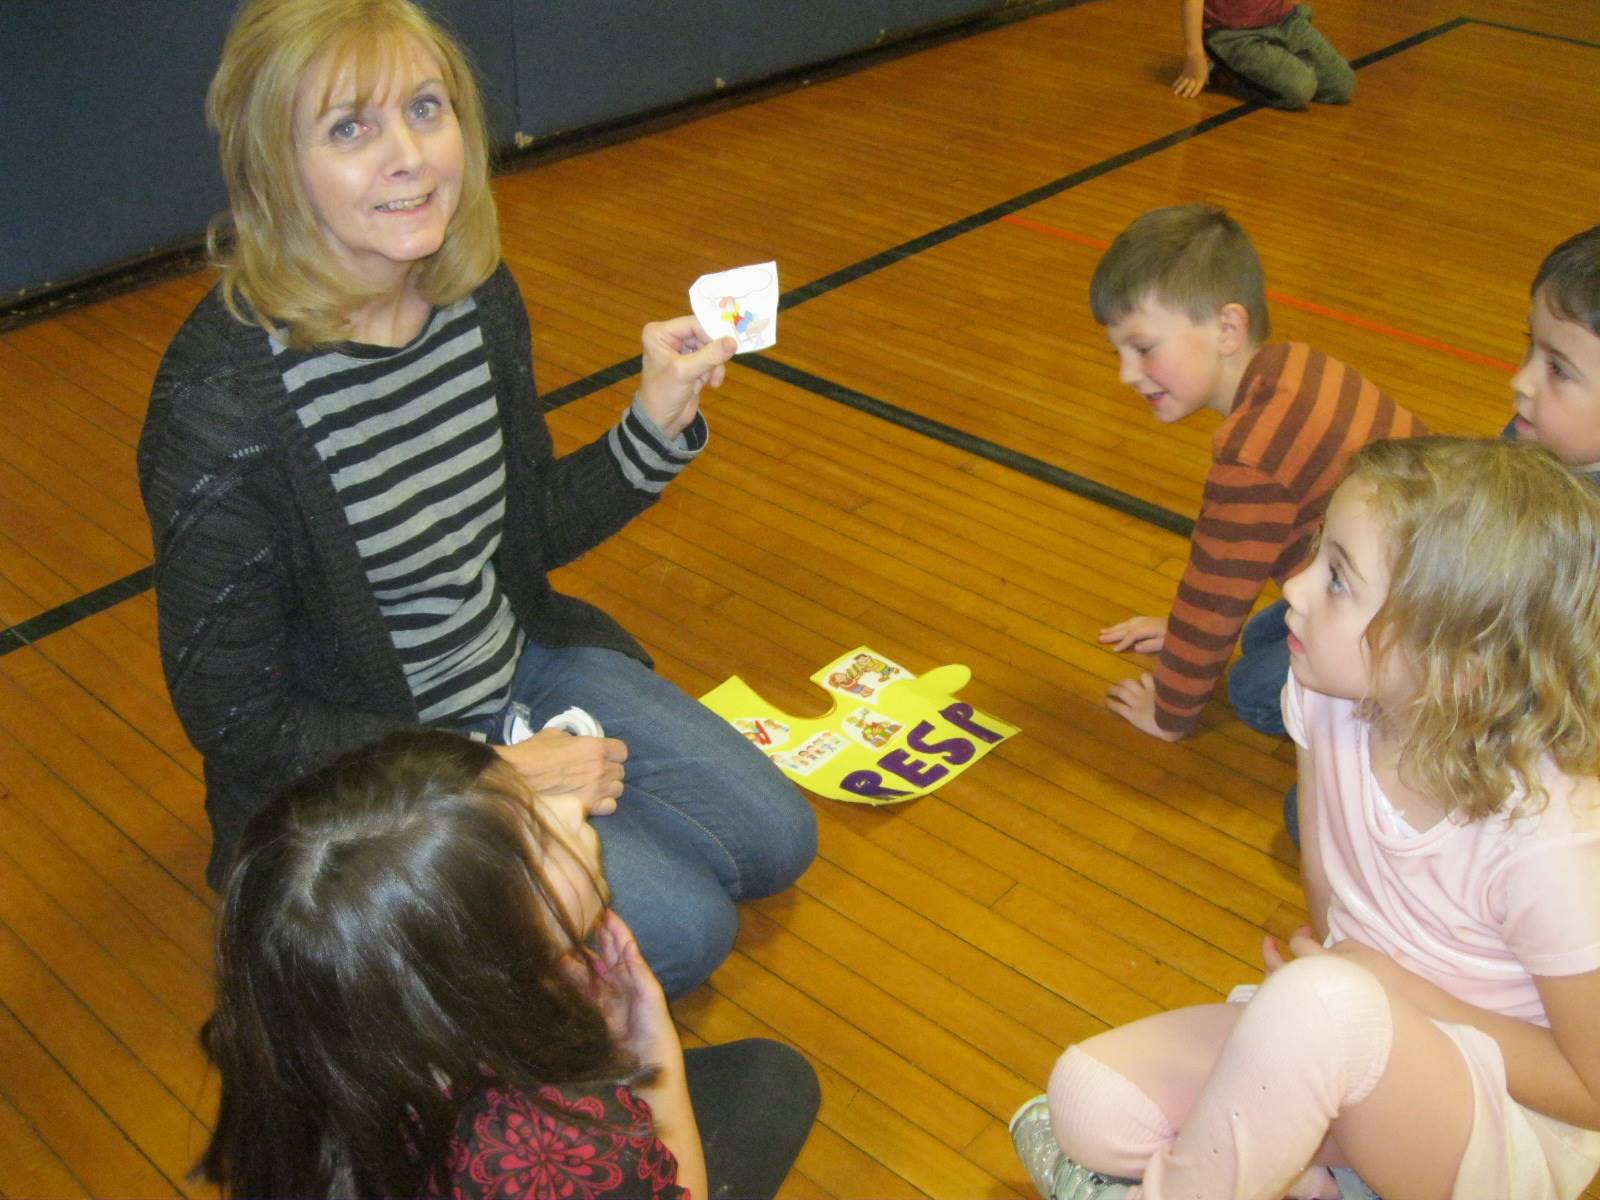 A staff member shows her students a responsible picture.